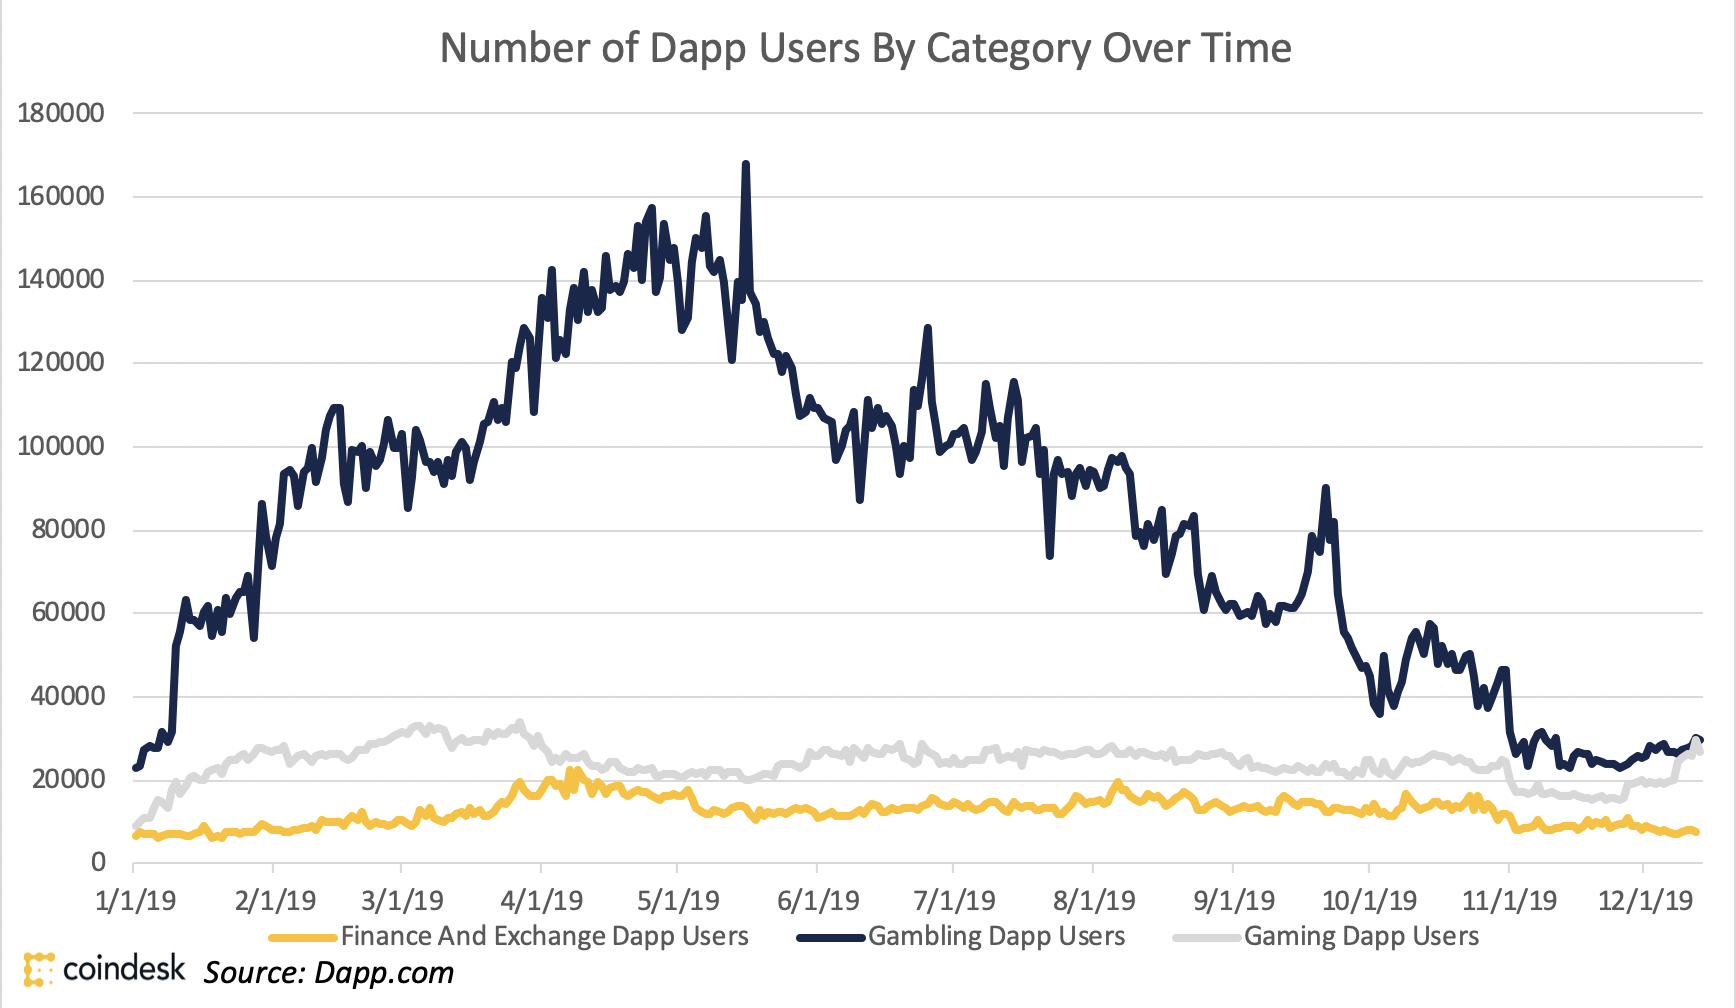 Compared-to-gaming-and-gambling-dapps,-defi-is-still-behind